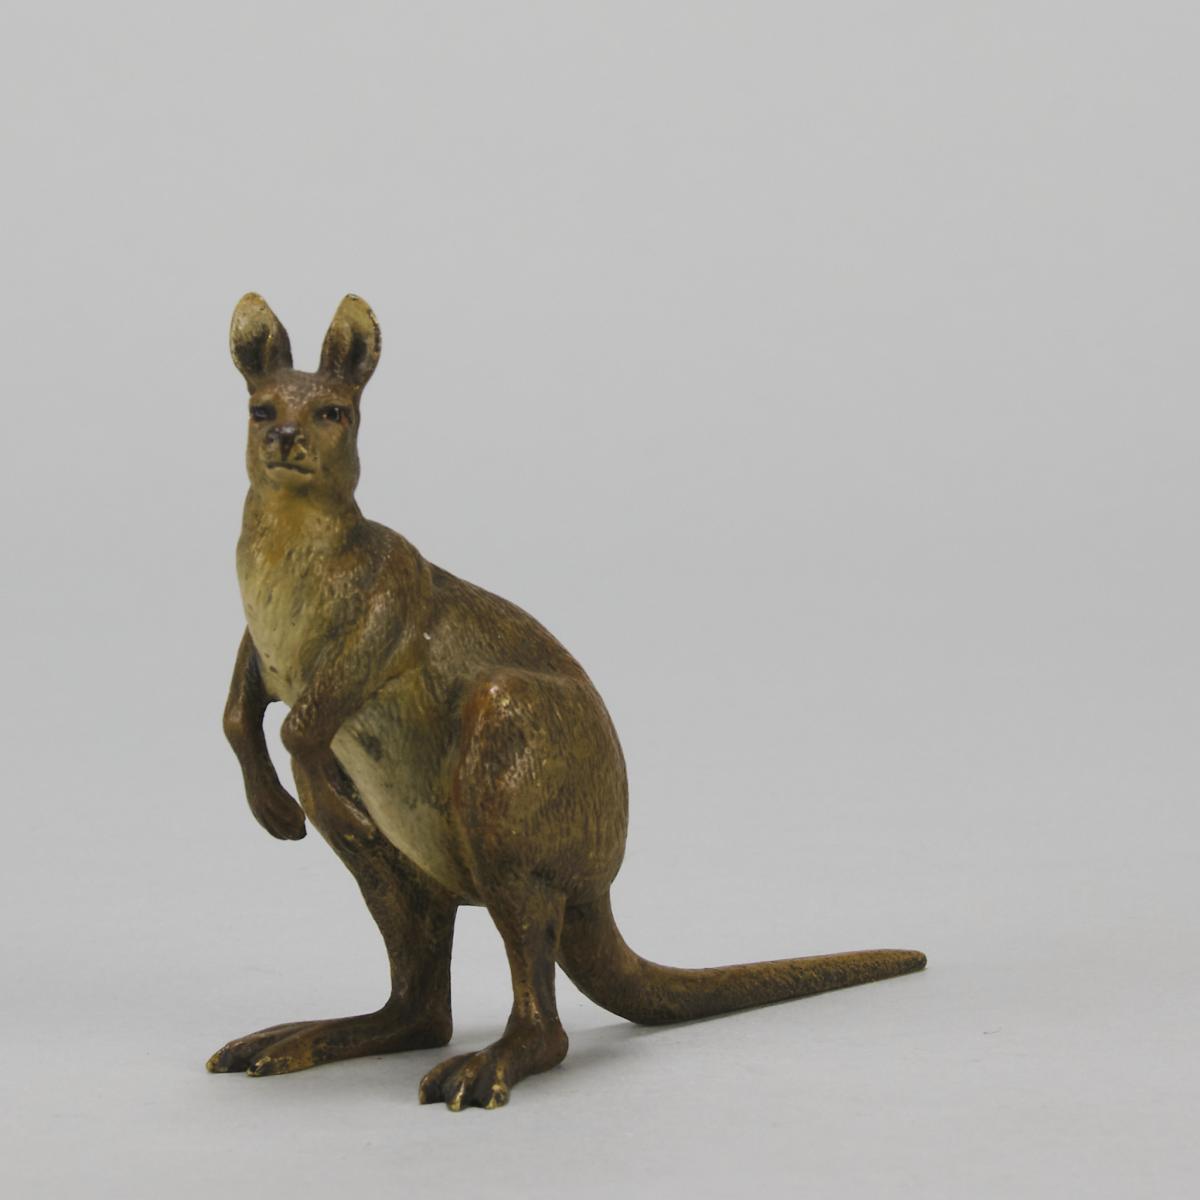 Classical Orientalist Cold-Painted Bronze entitled "Kangaroo" by Franz Bergman